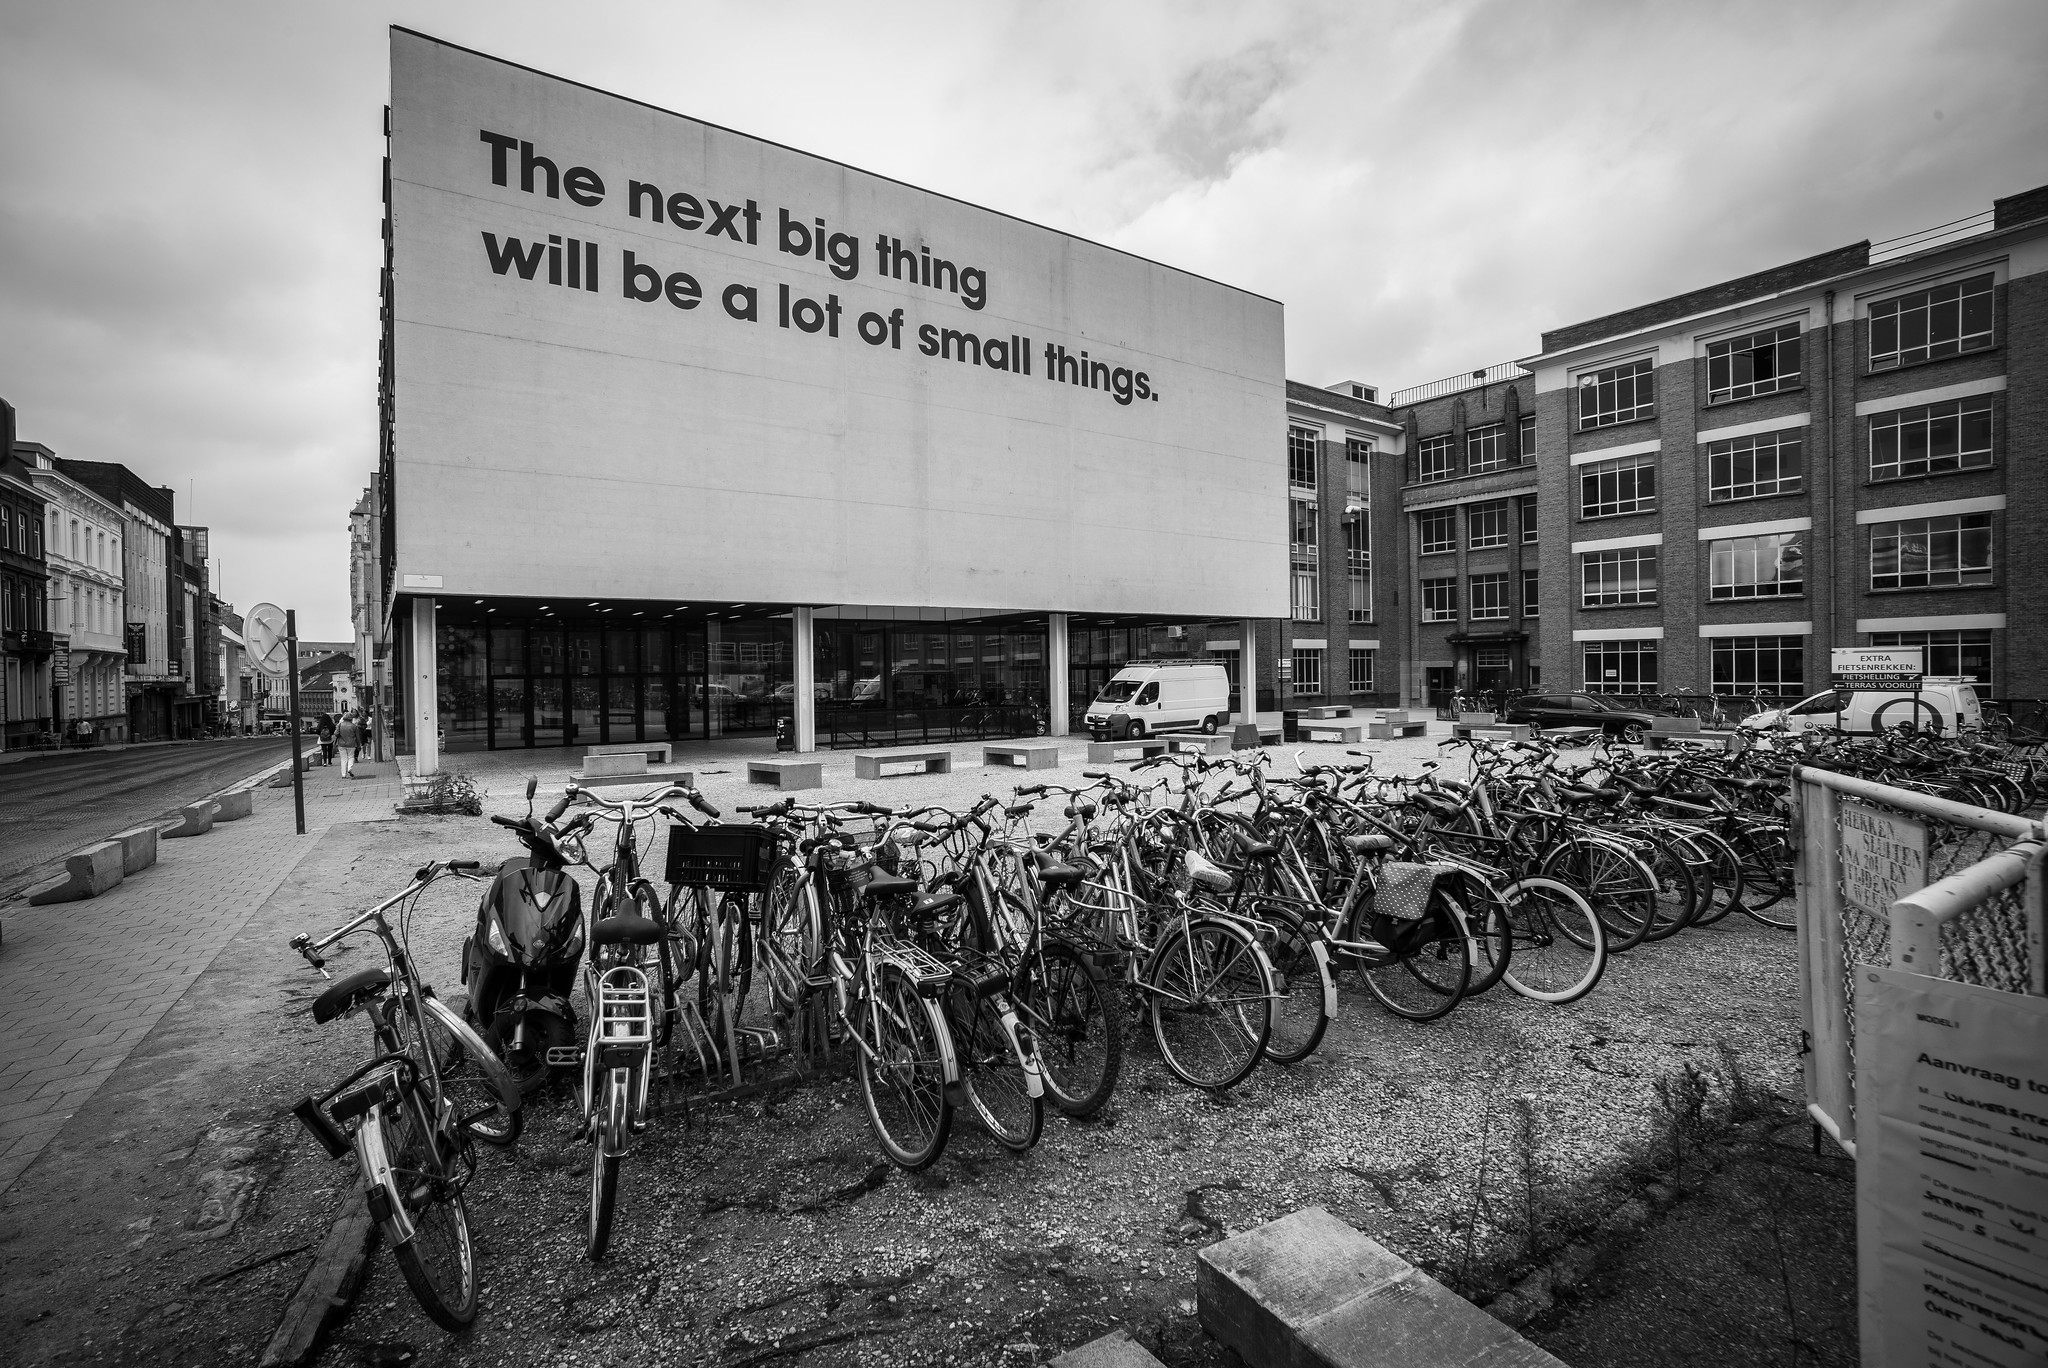 Building showing the quote 'The next big thing will be a lot of small things'